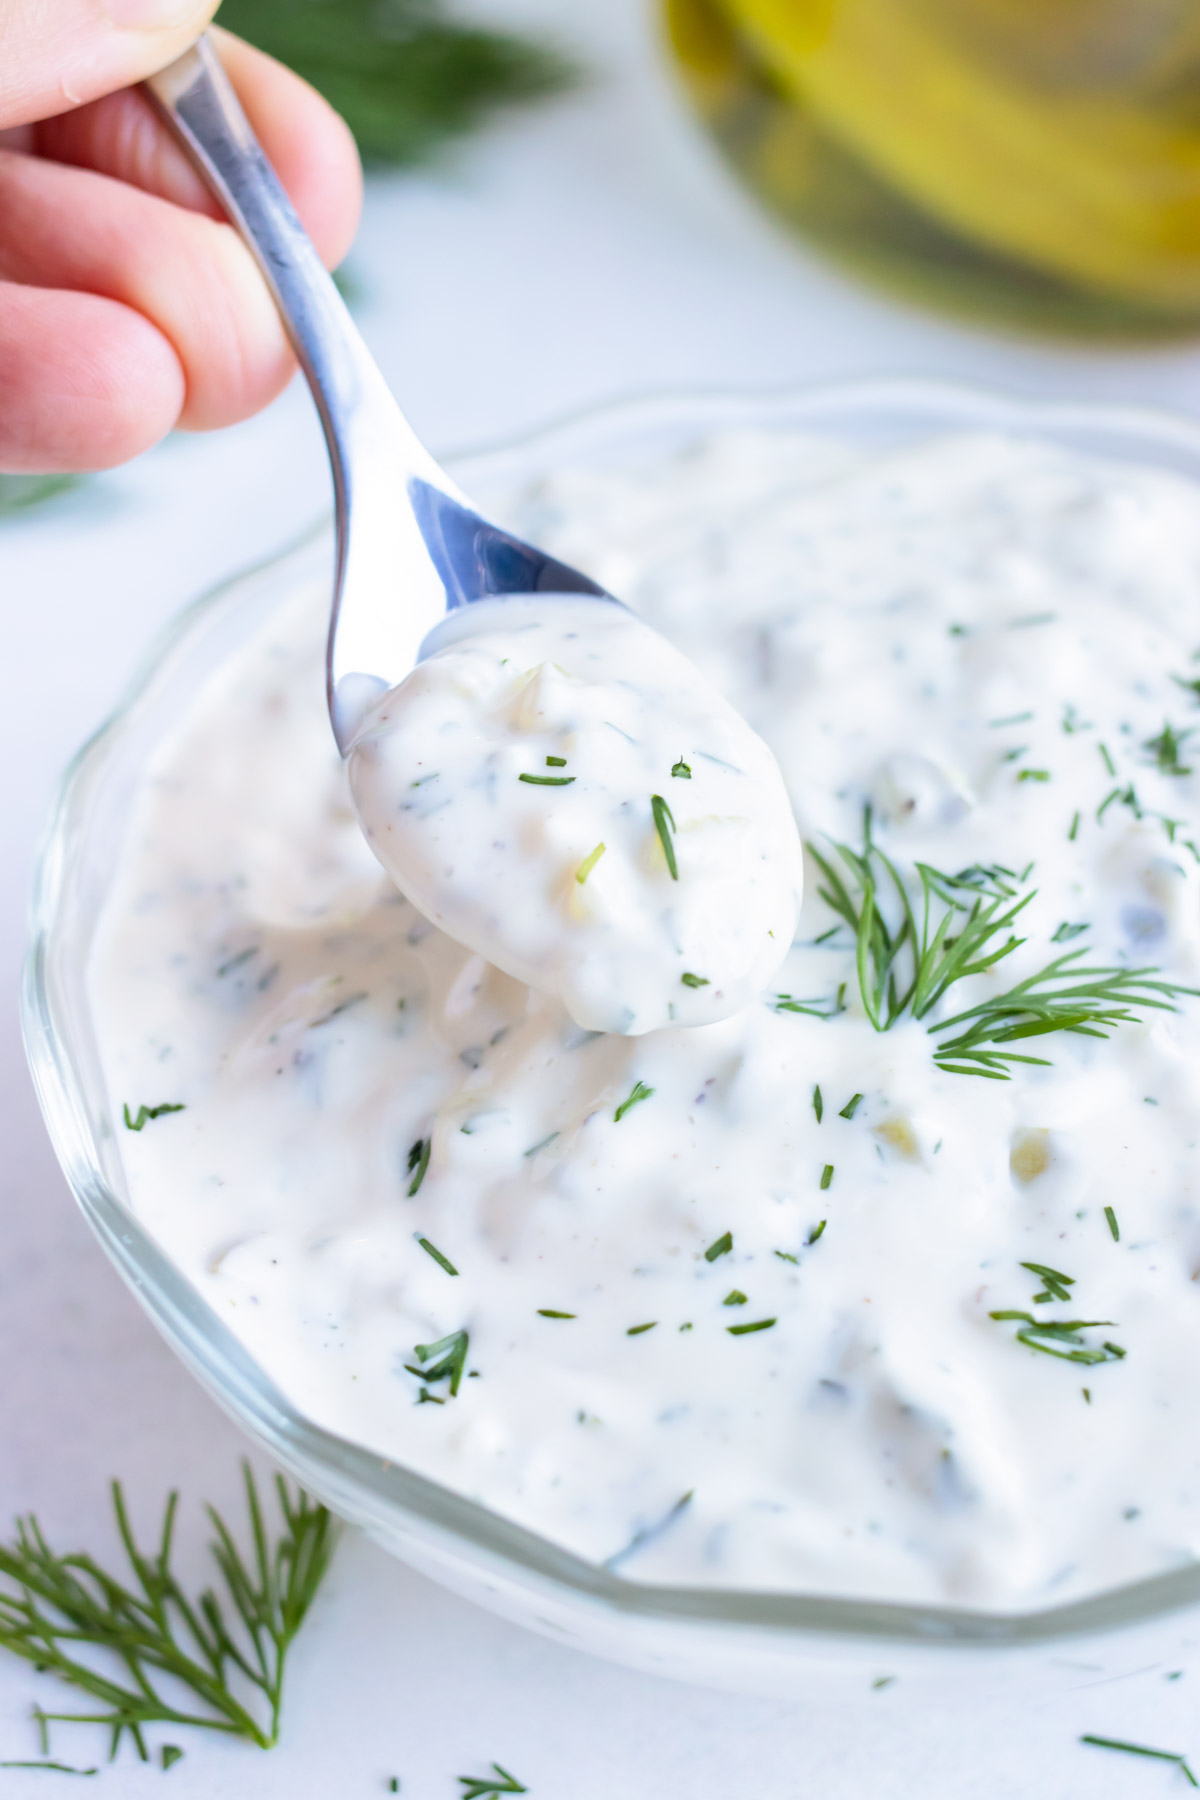 Tartar sauce recipe is served with a spoon for serving with fries or crab cakes.